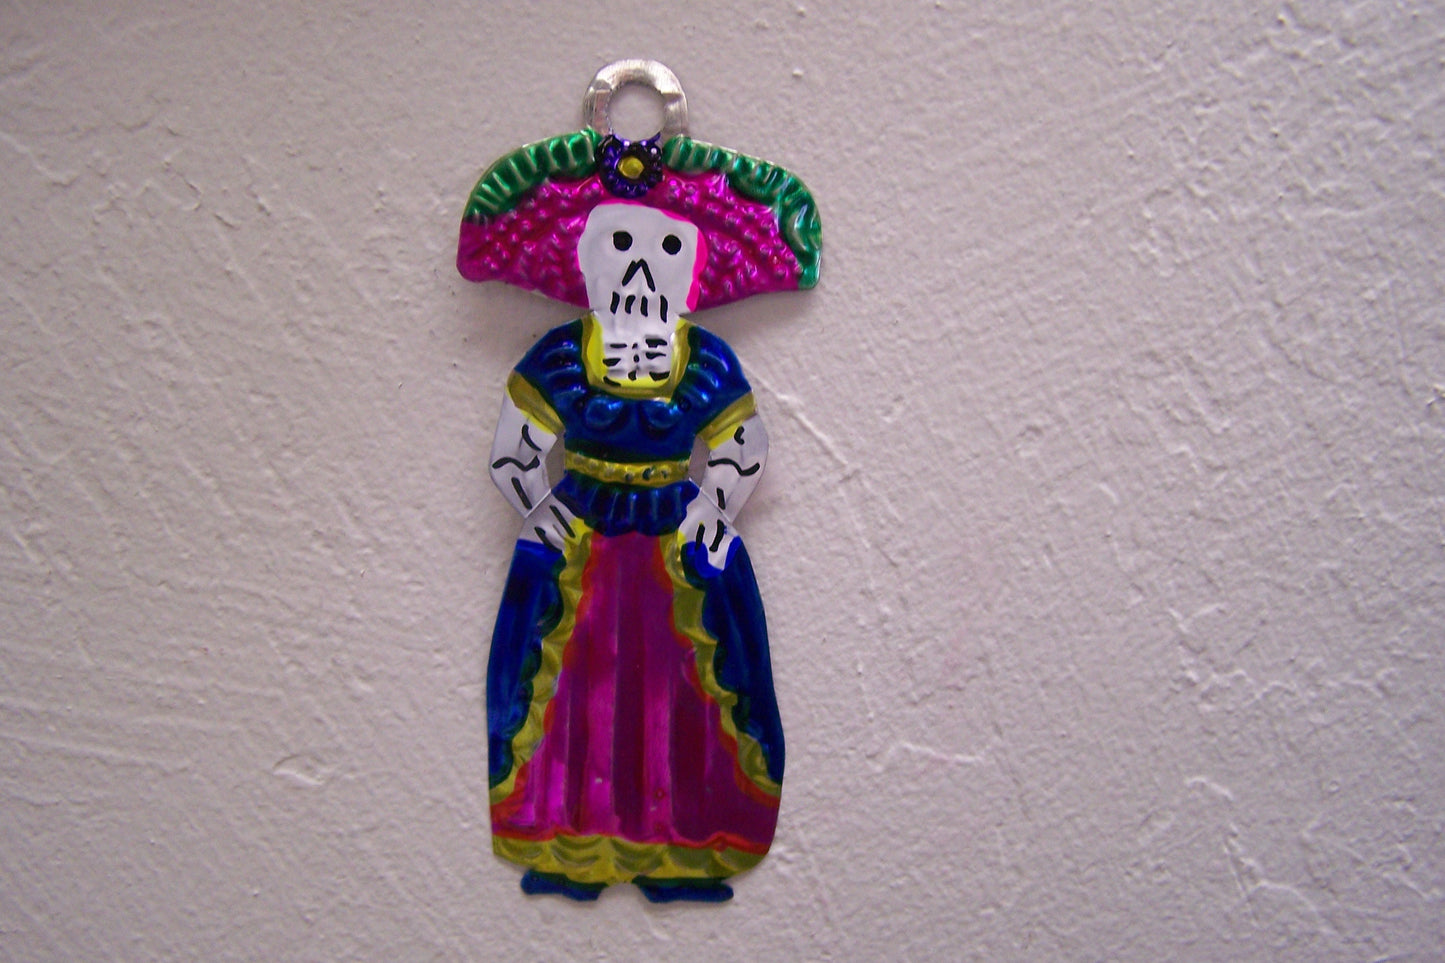 Lot of 6 Tin Painted Day of the Dead Ornaments - Catrina, Fancy Skeleton Lady - Mexico